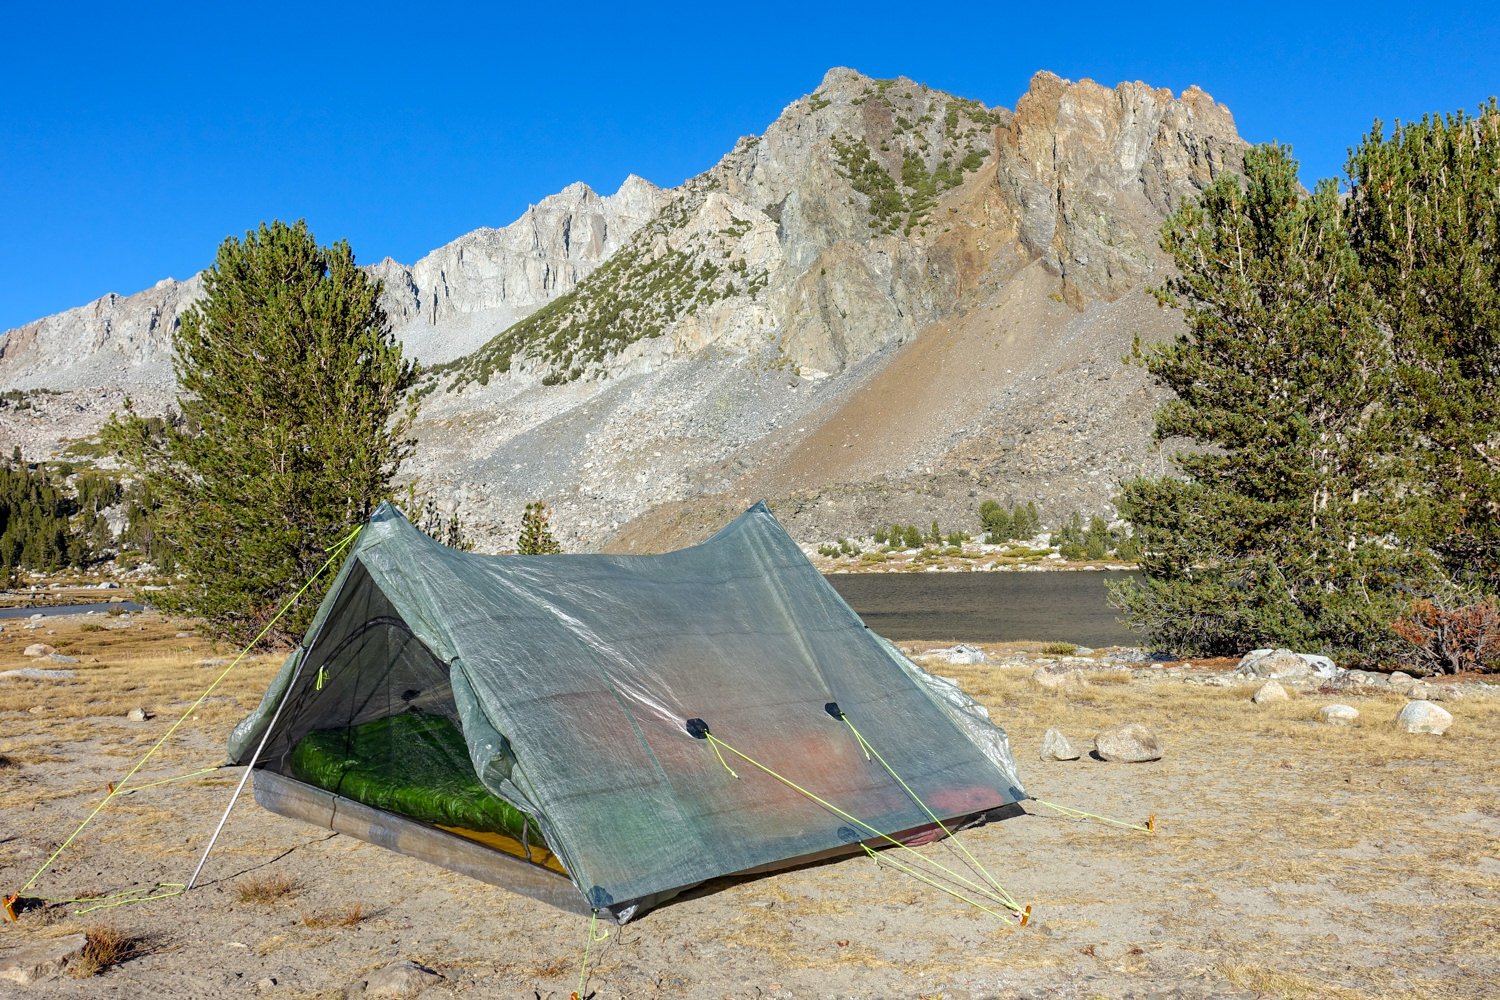 The Zpacks Triplex set up in front of a mountain view